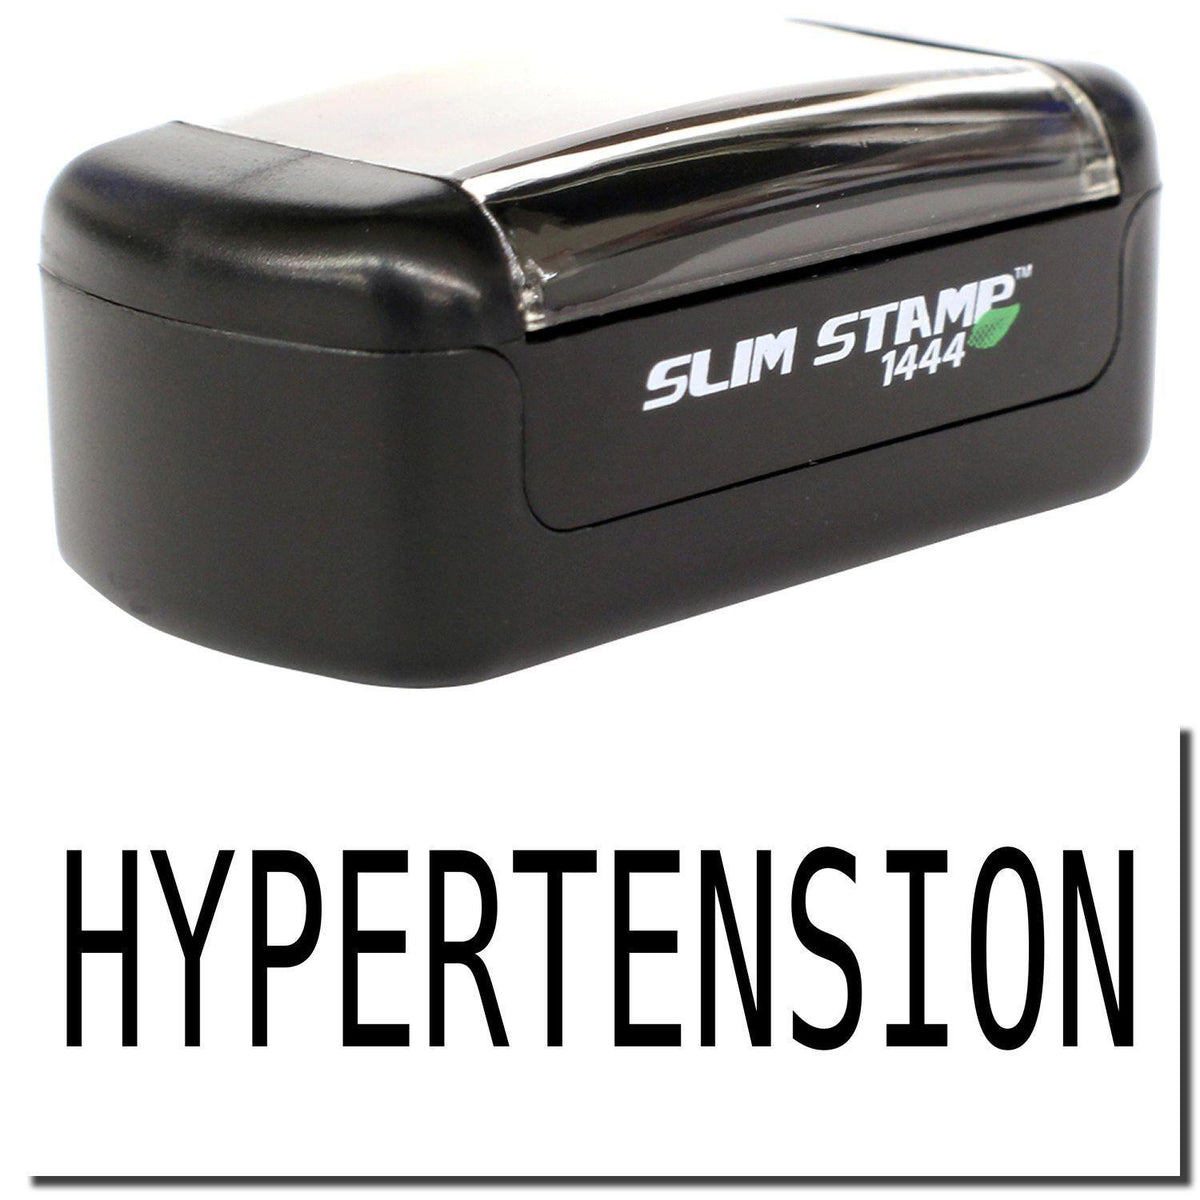 A stock office pre-inked stamp with a stamped image showing how the text &quot;HYPERTENSION&quot; is displayed after stamping.